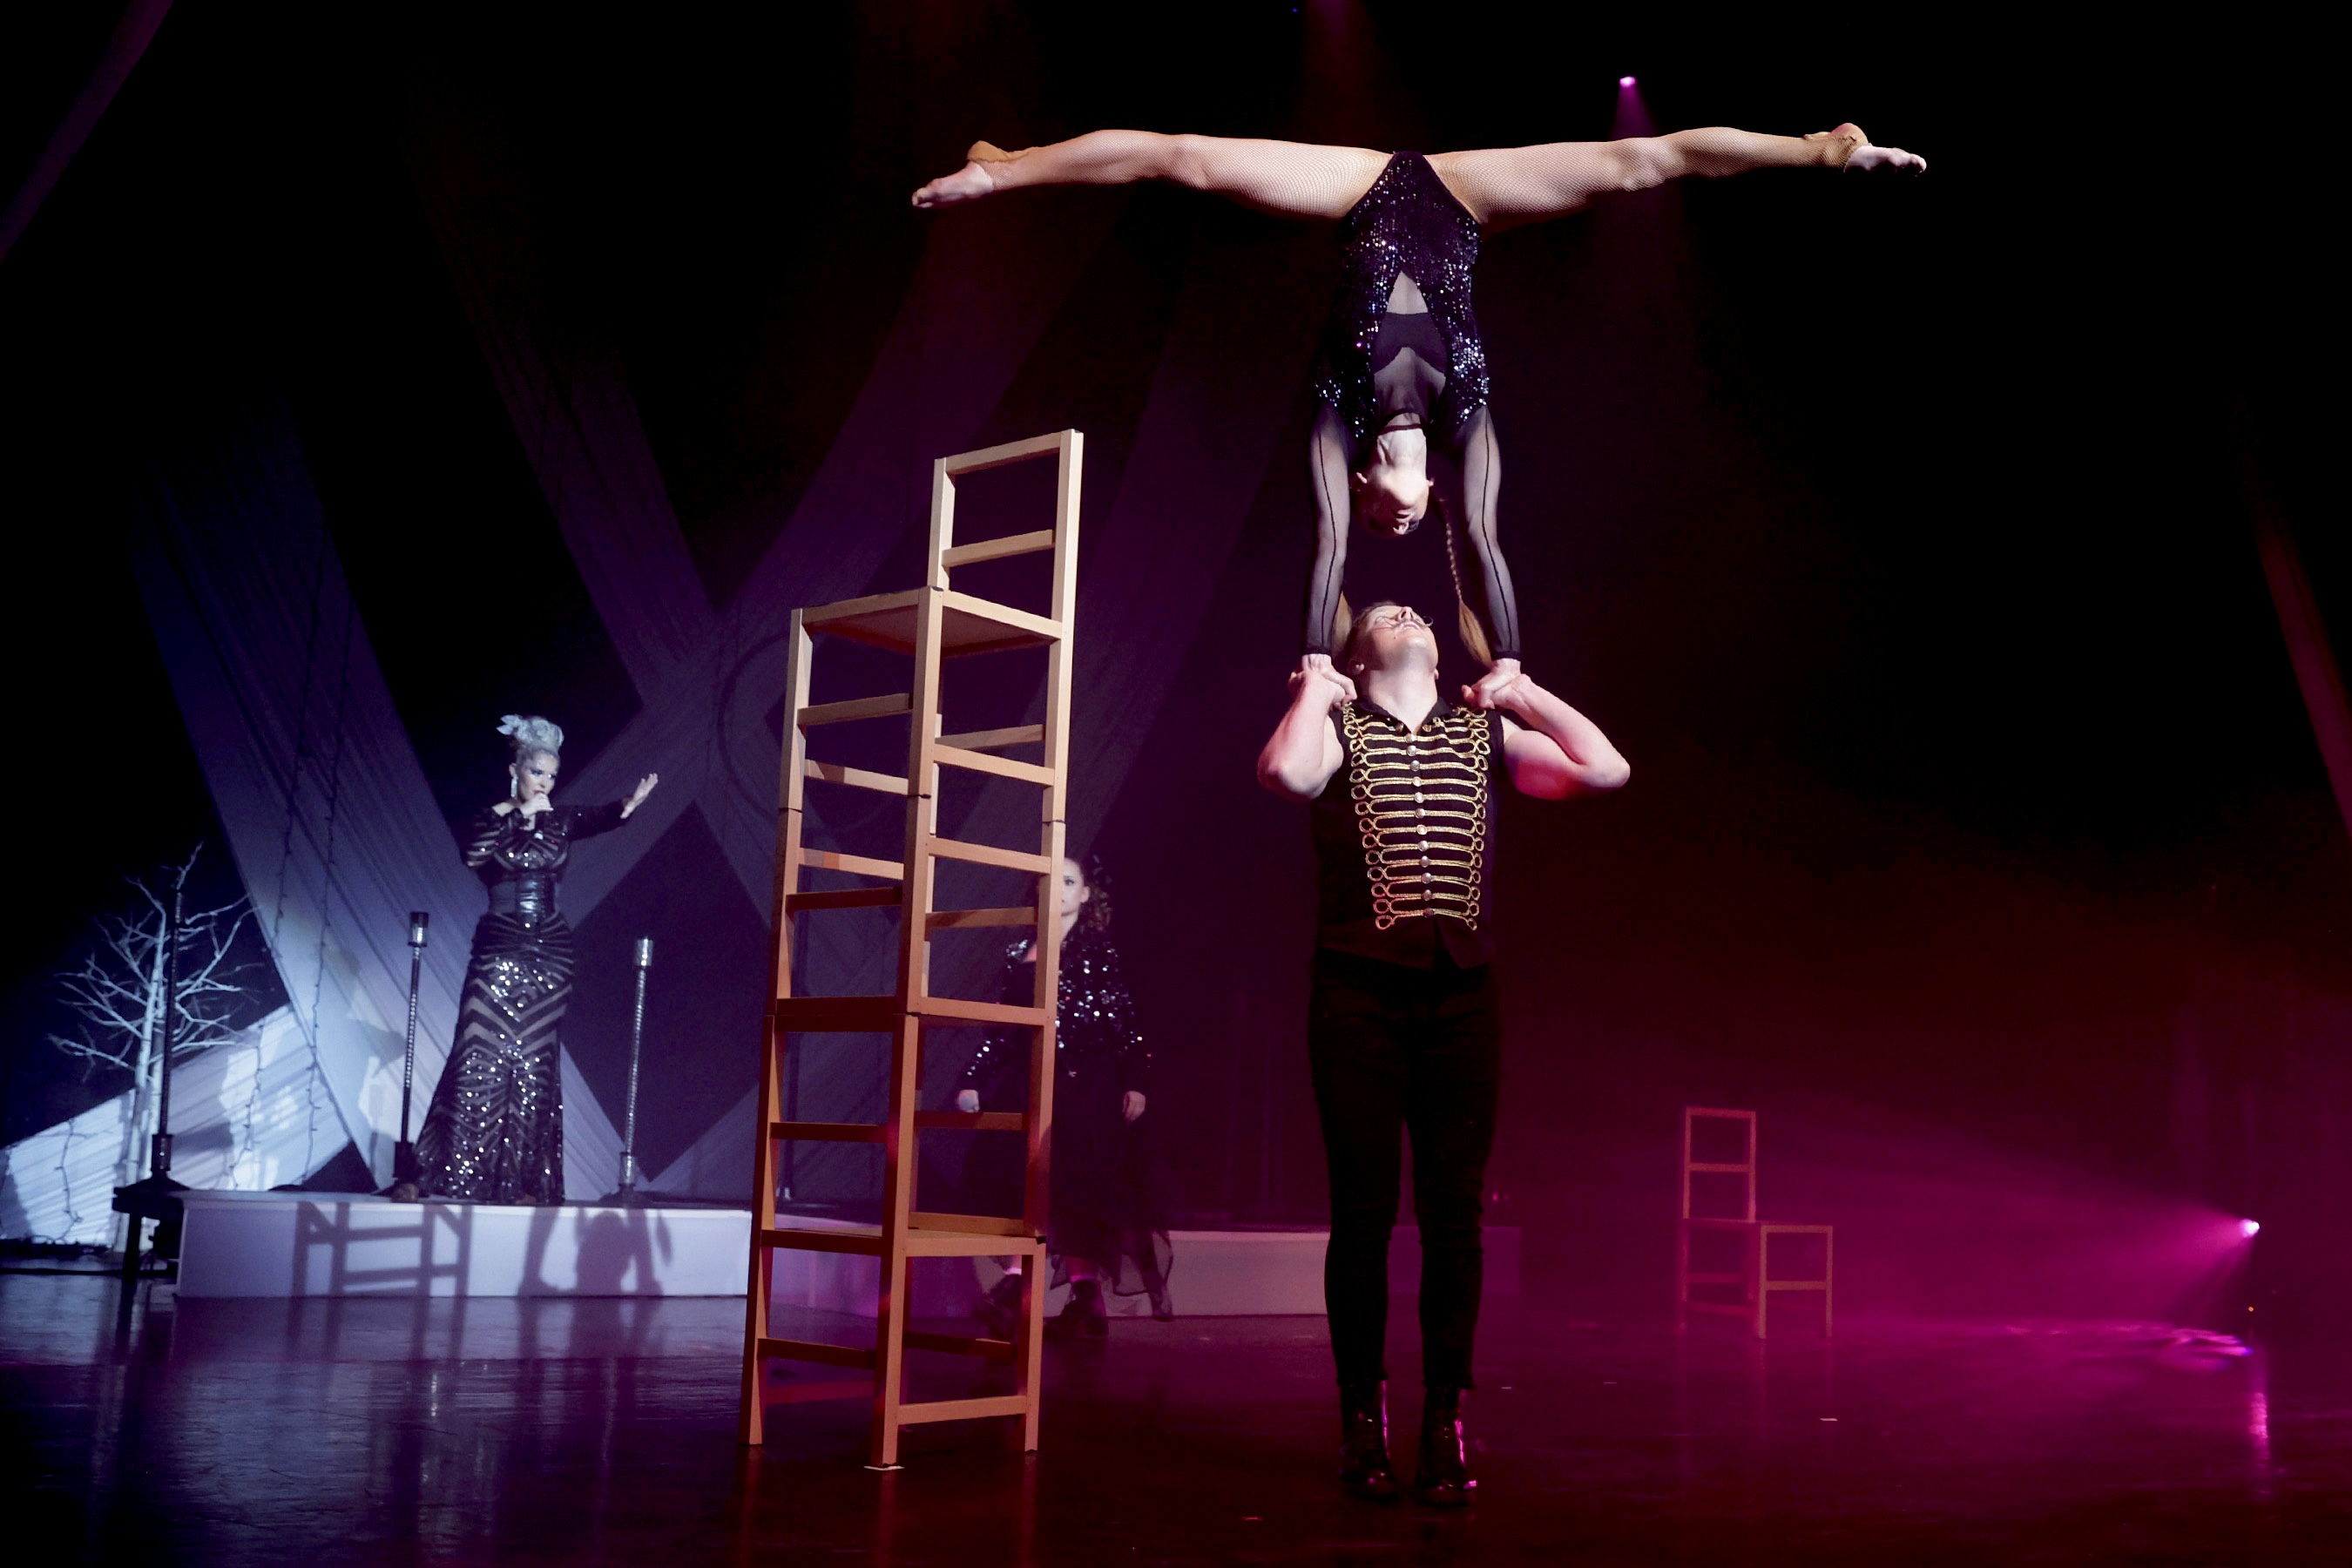 a man holding a woman upside down on a stage